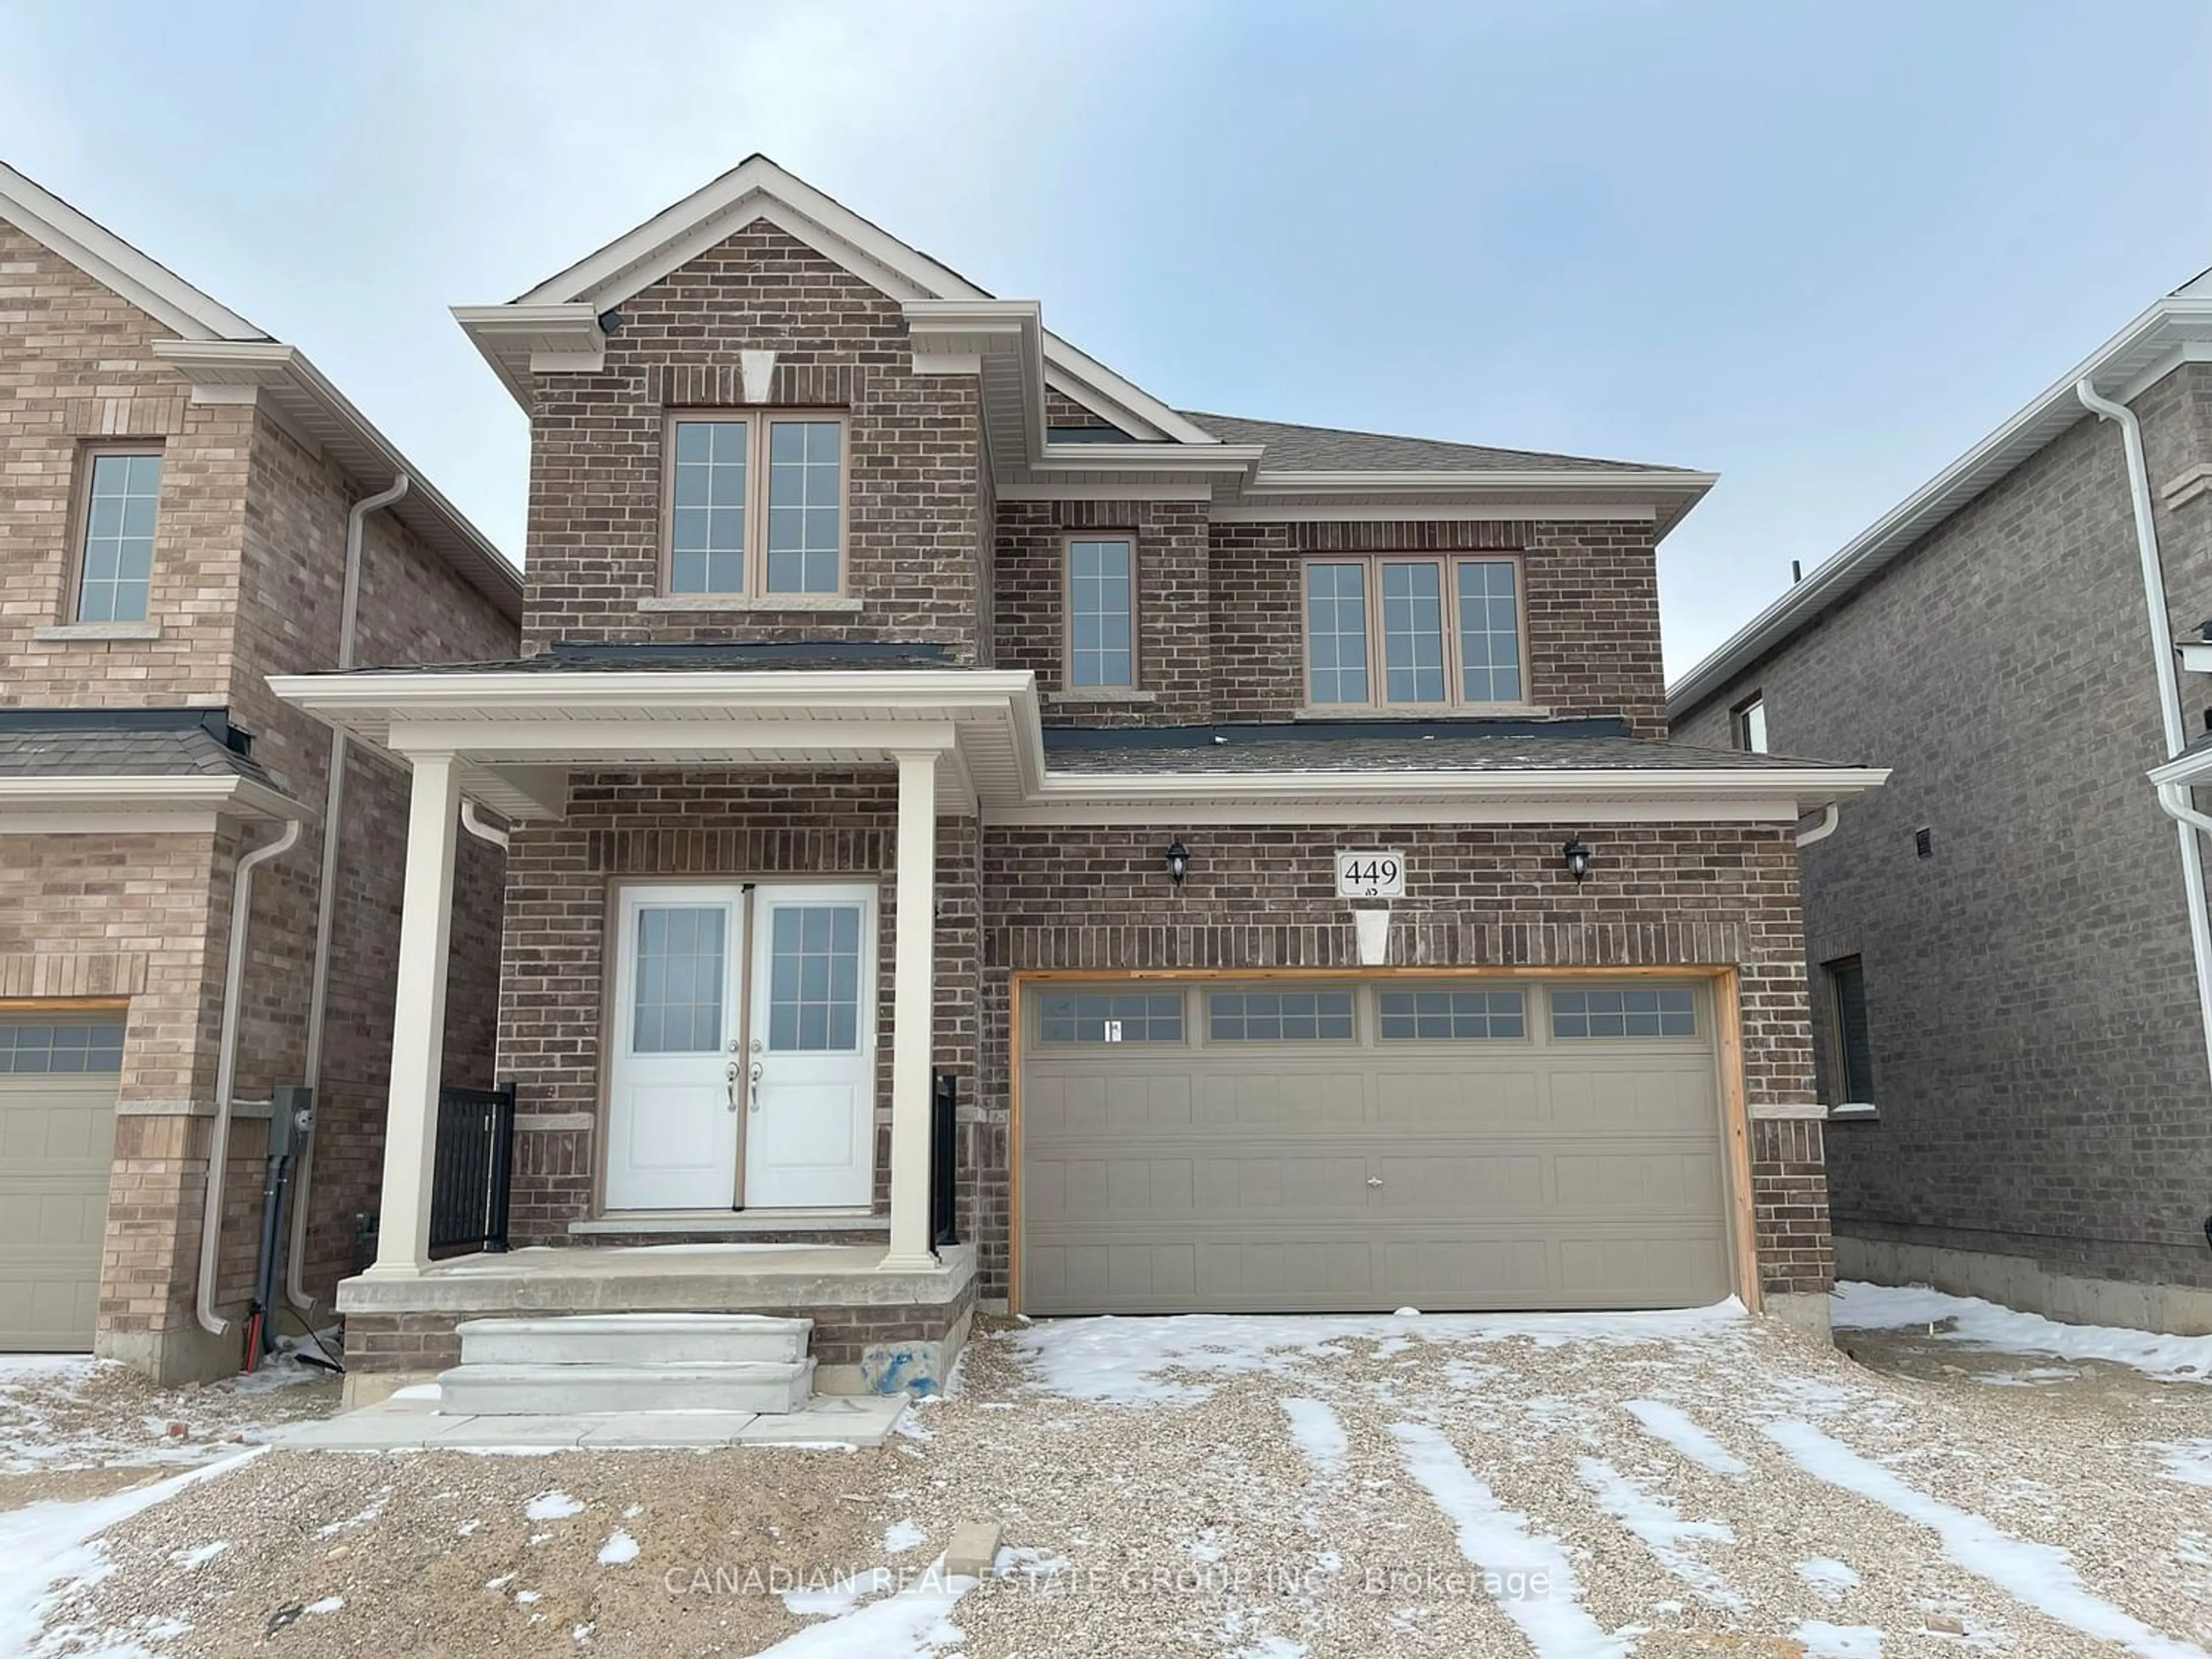 Home with brick exterior material for 449 Van Dusen Ave, Southgate Ontario N0C 1B0